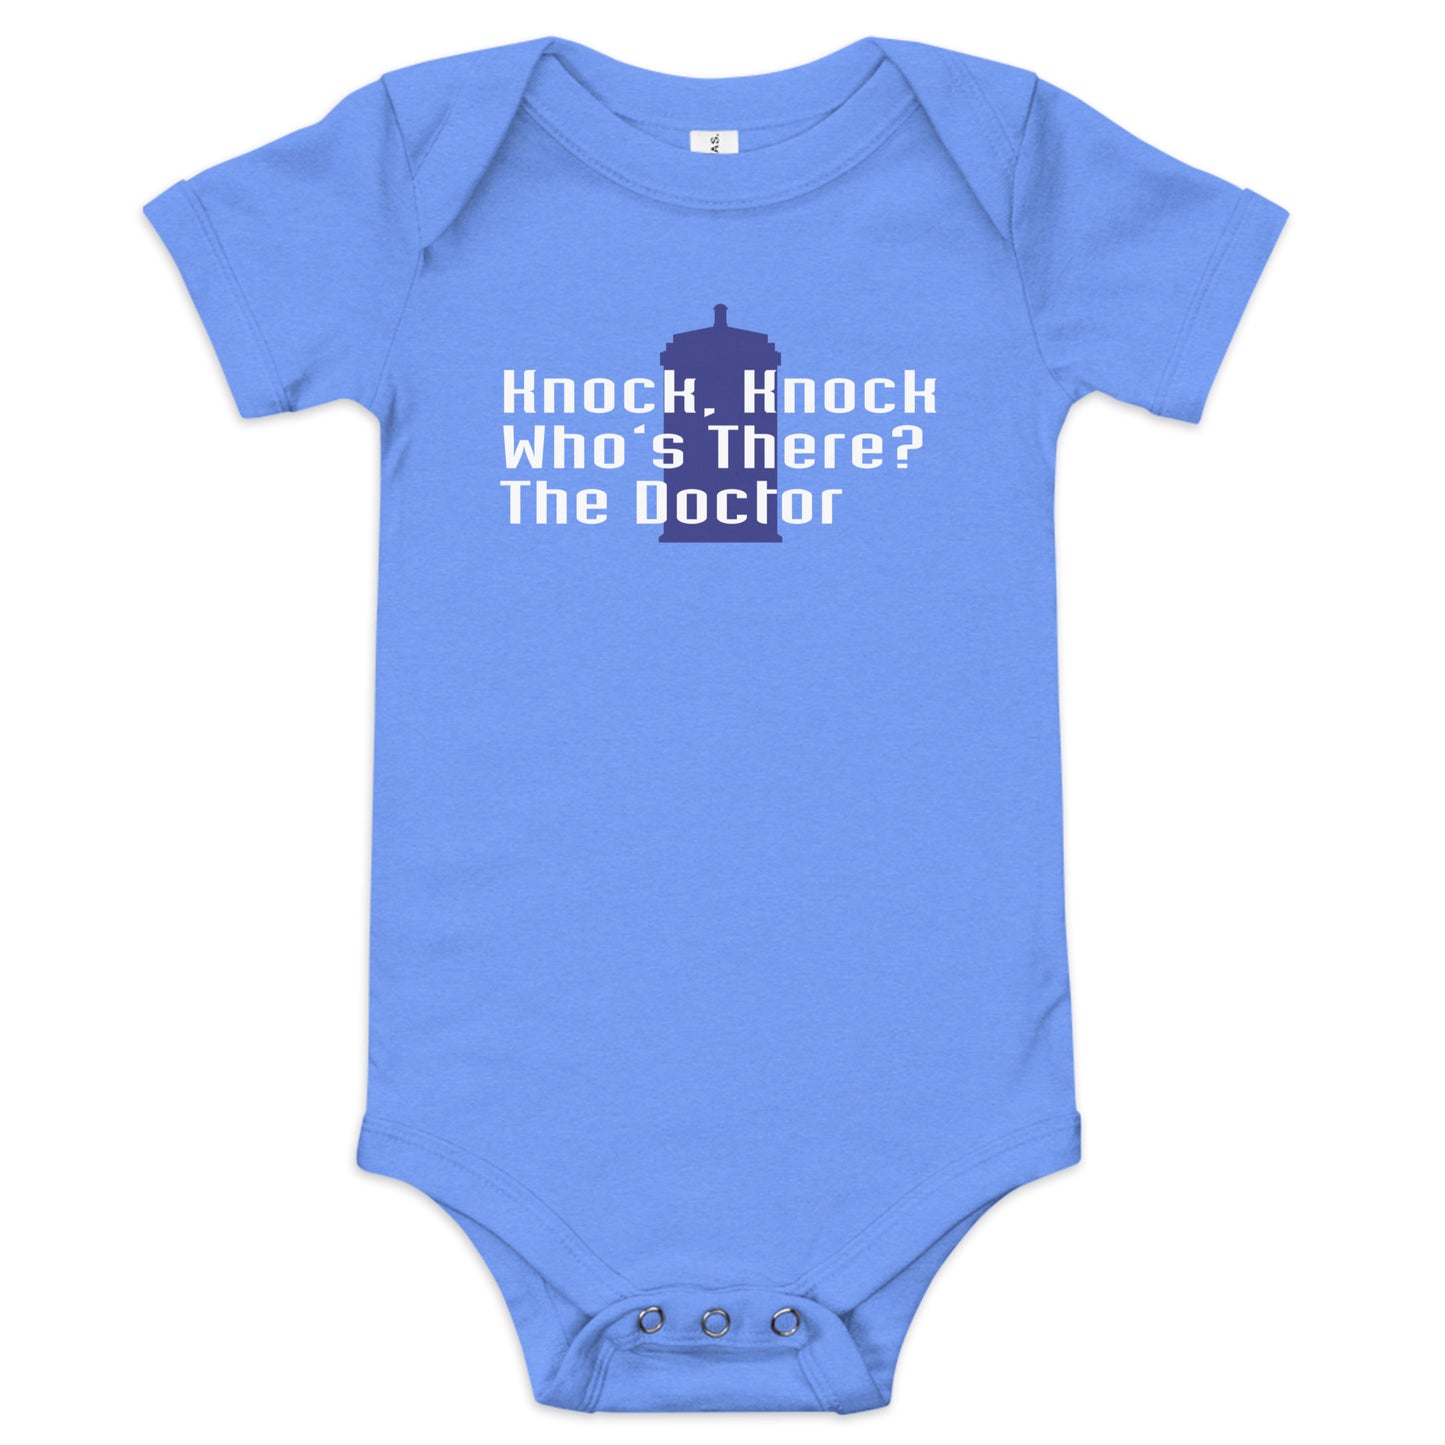 Knock Knock! Who's There? The Doctor Kid's Onesie